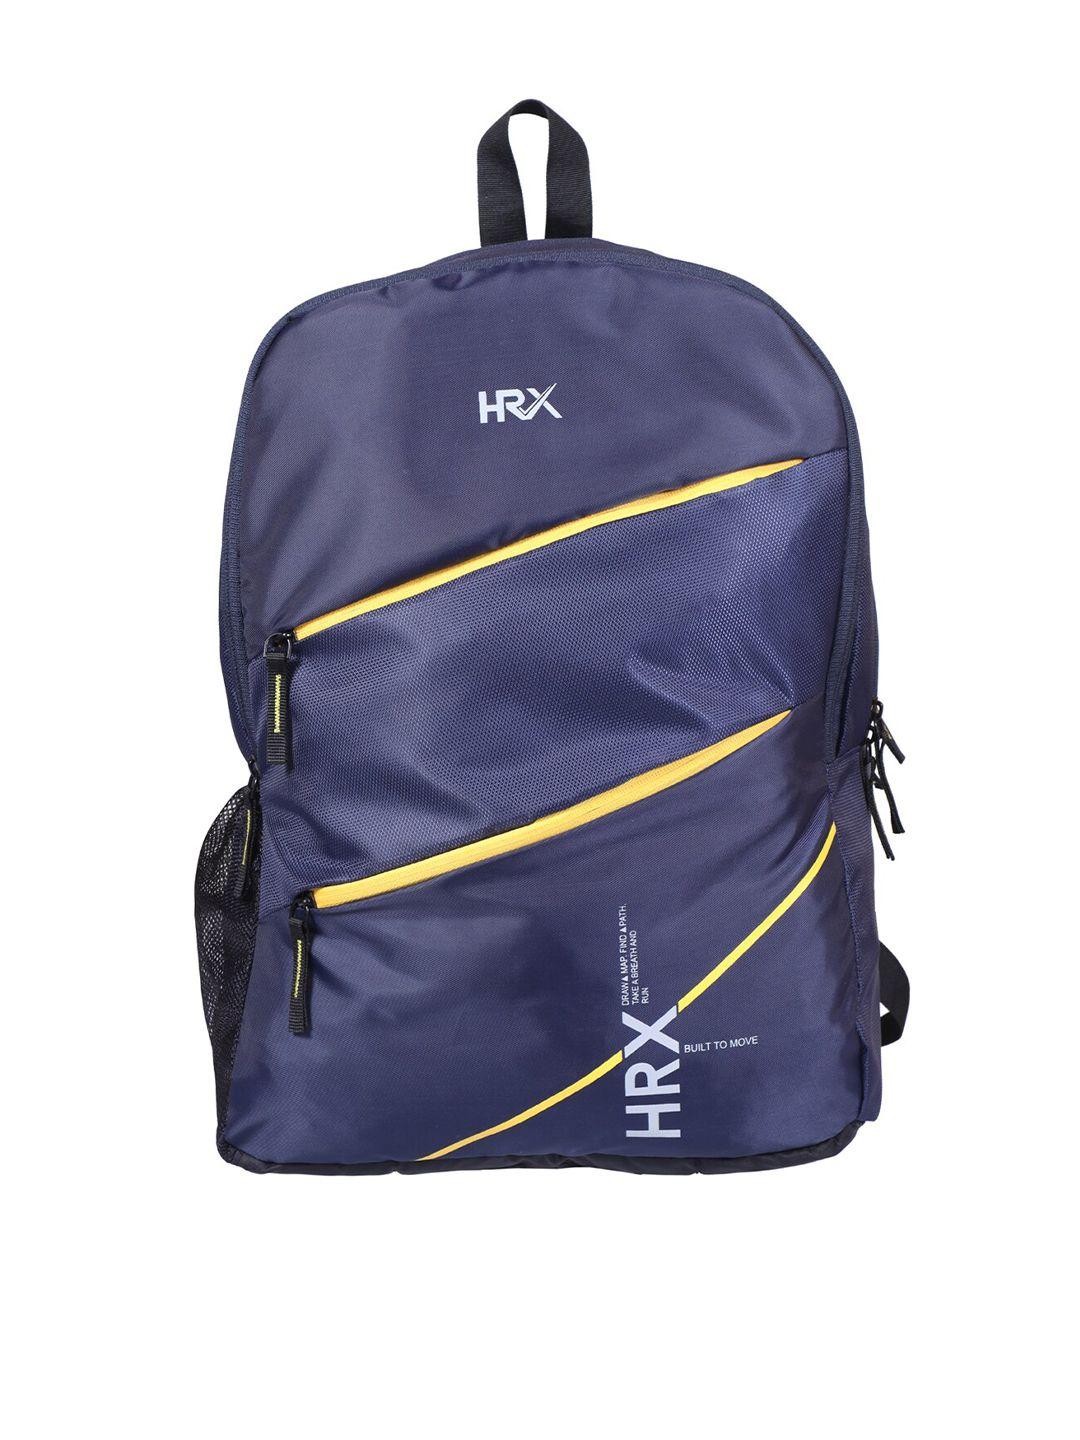 hrx by hrithik roshan brand logo water resistant large size backpack